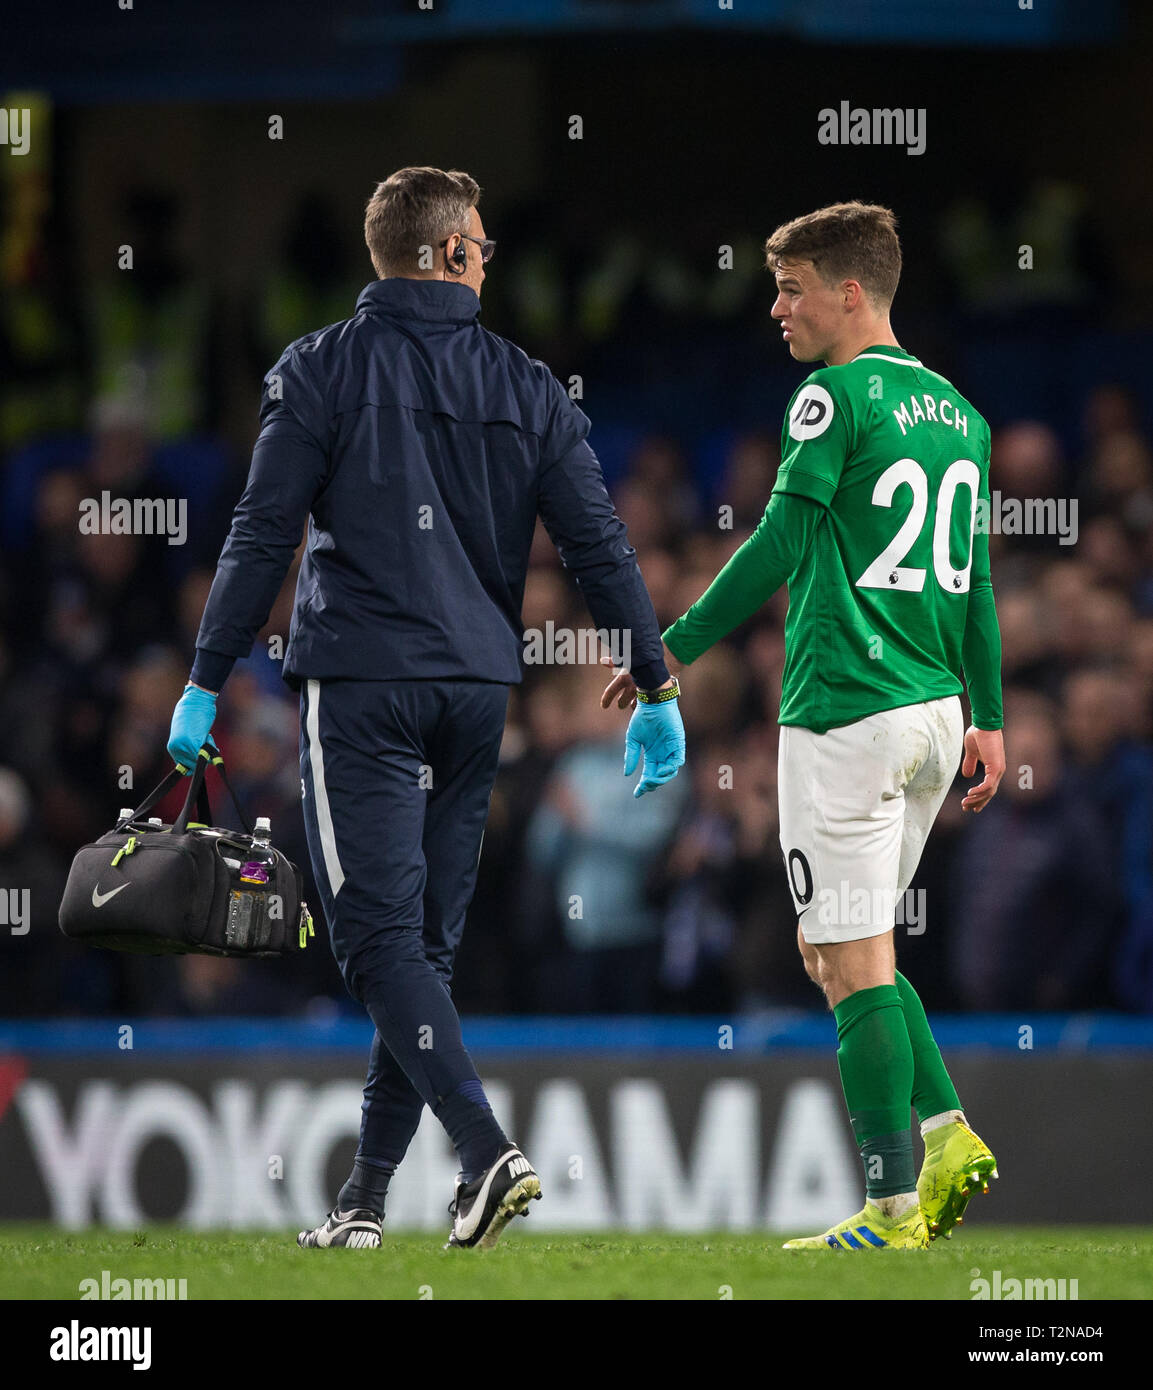 London, UK. 03rd Apr, 2019. Solly March of Brighton & Hove Albion goes off injured during the Premier League match between Chelsea and Brighton and Hove Albion at Stamford Bridge, London, England on 3 April 2019. Photo by Andy Rowland. Credit: Andrew Rowland/Alamy Live News Stock Photo